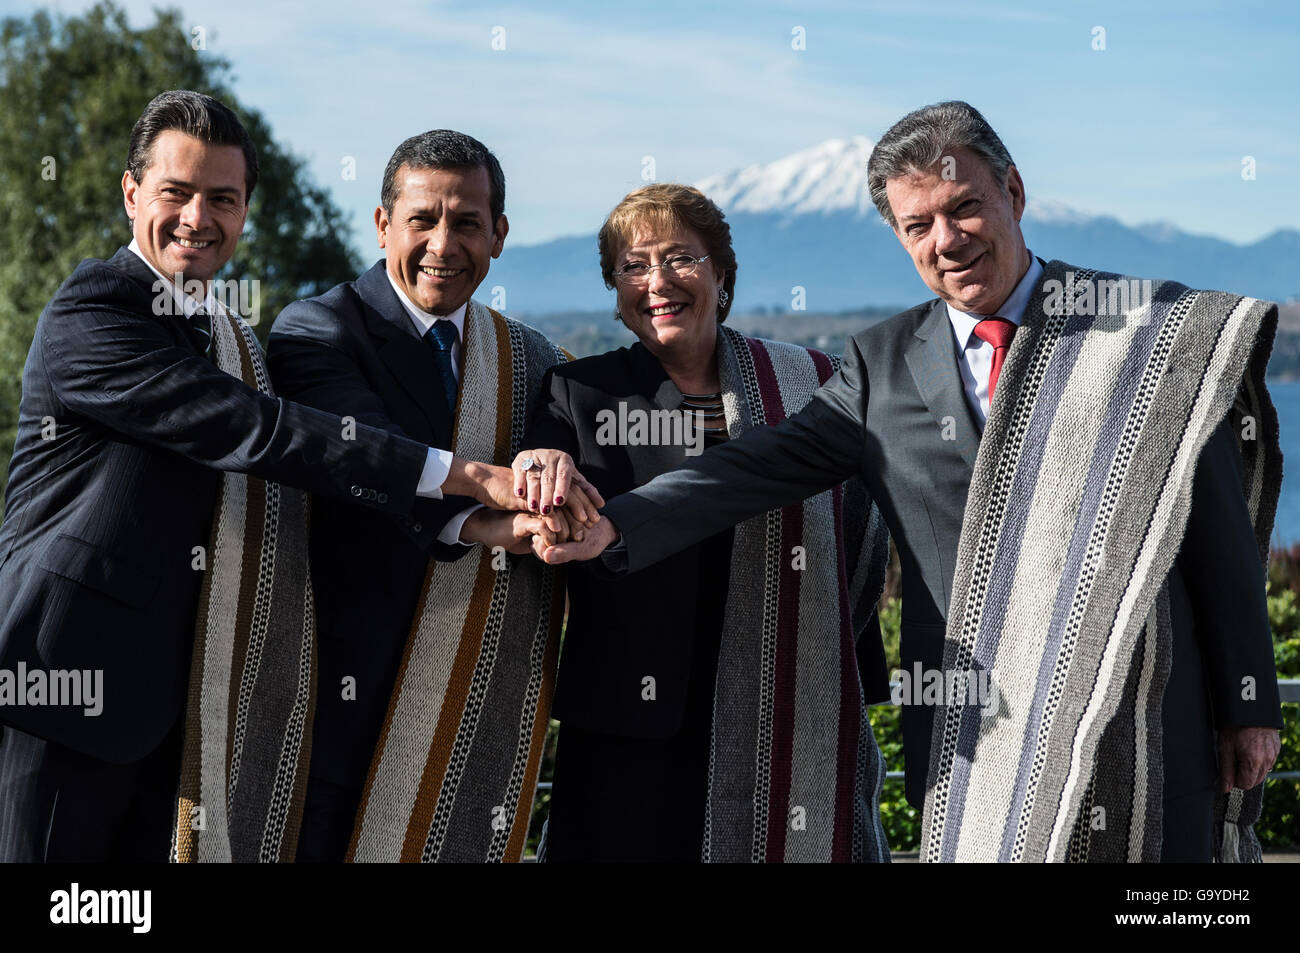 Puerto Varas, Chile. 1st July, 2016. (L-R) Mexico's President Enrique Pena Nieto, Peru's President Ollanta Humala, Chile's President Michelle Bachelet and Colombia's President Juan Manuel Santos pose for photos during the 11th Presidential Summit of the Pacific Alliance in Puerto Varas, Chile, on July 1, 2016. The Pacific Alliance, a trade bloc uniting four Latin American nations bordering the Pacific Ocean, announced on Friday its intention to bolster trade relations with the Asia-Pacific region, especially with China. © Jorge Villegas/Xinhua/Alamy Live News Stock Photo